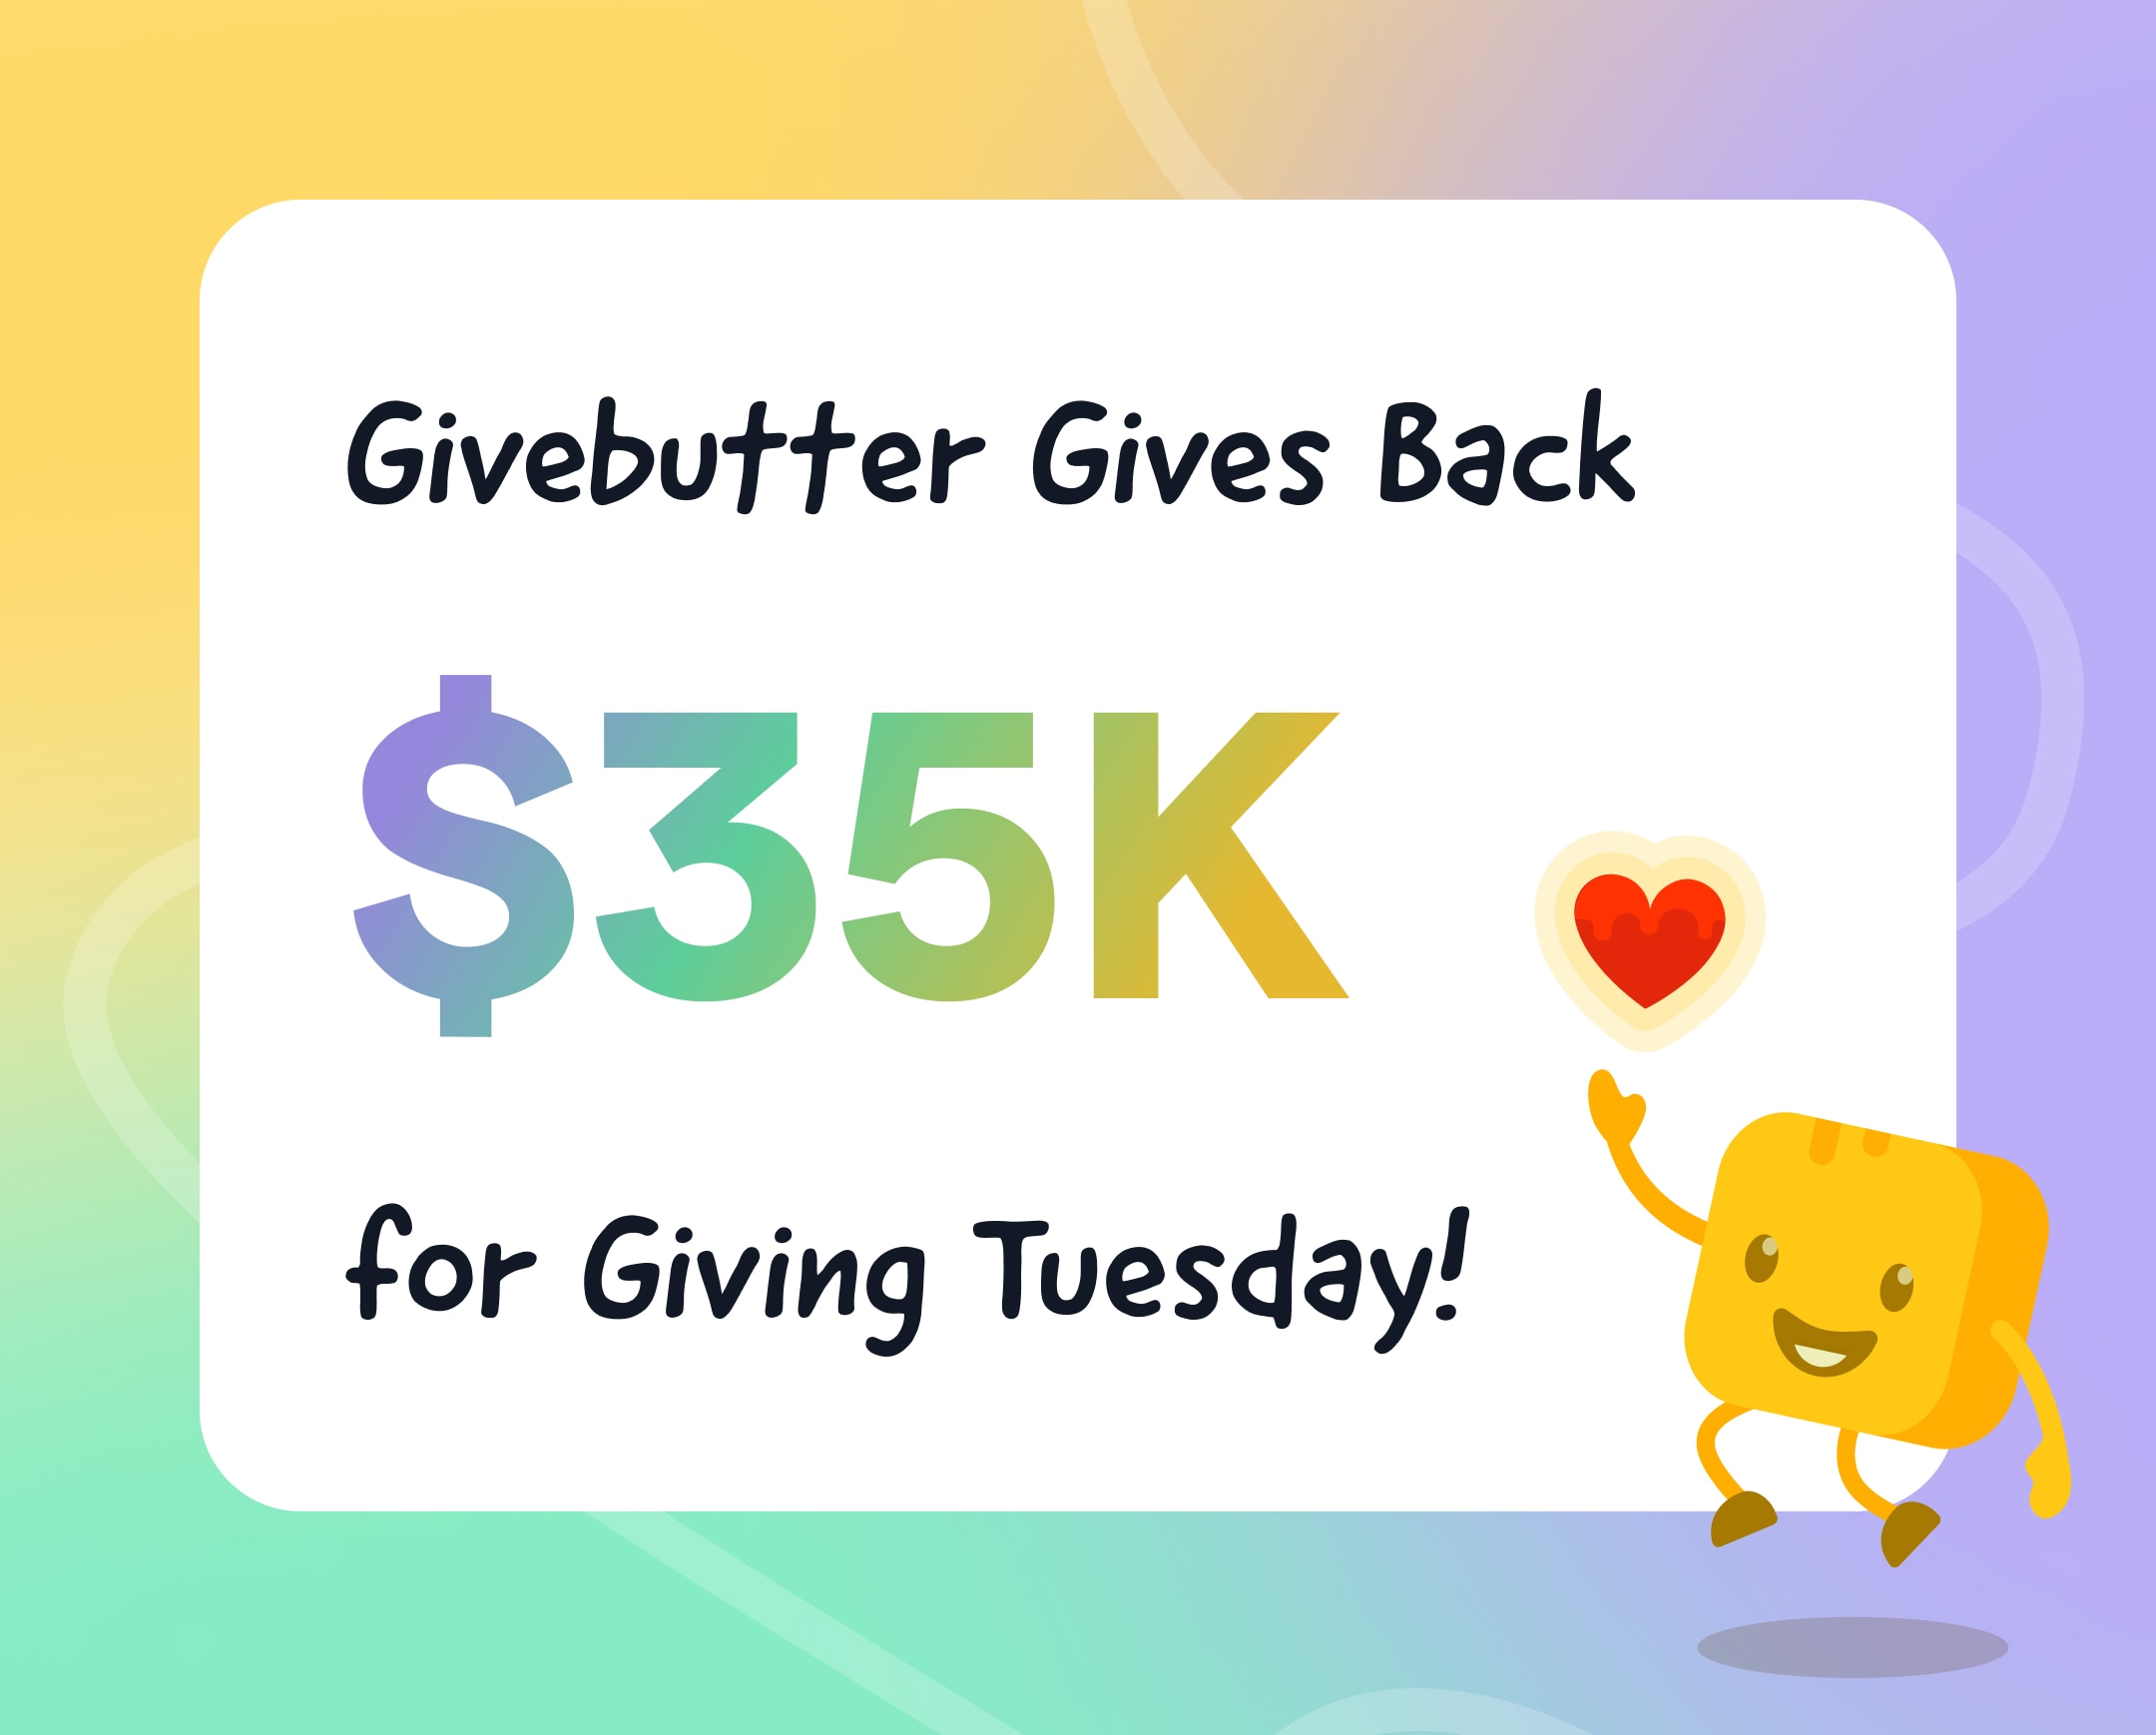 Givebutter gives back $35K for Giving Tuesday